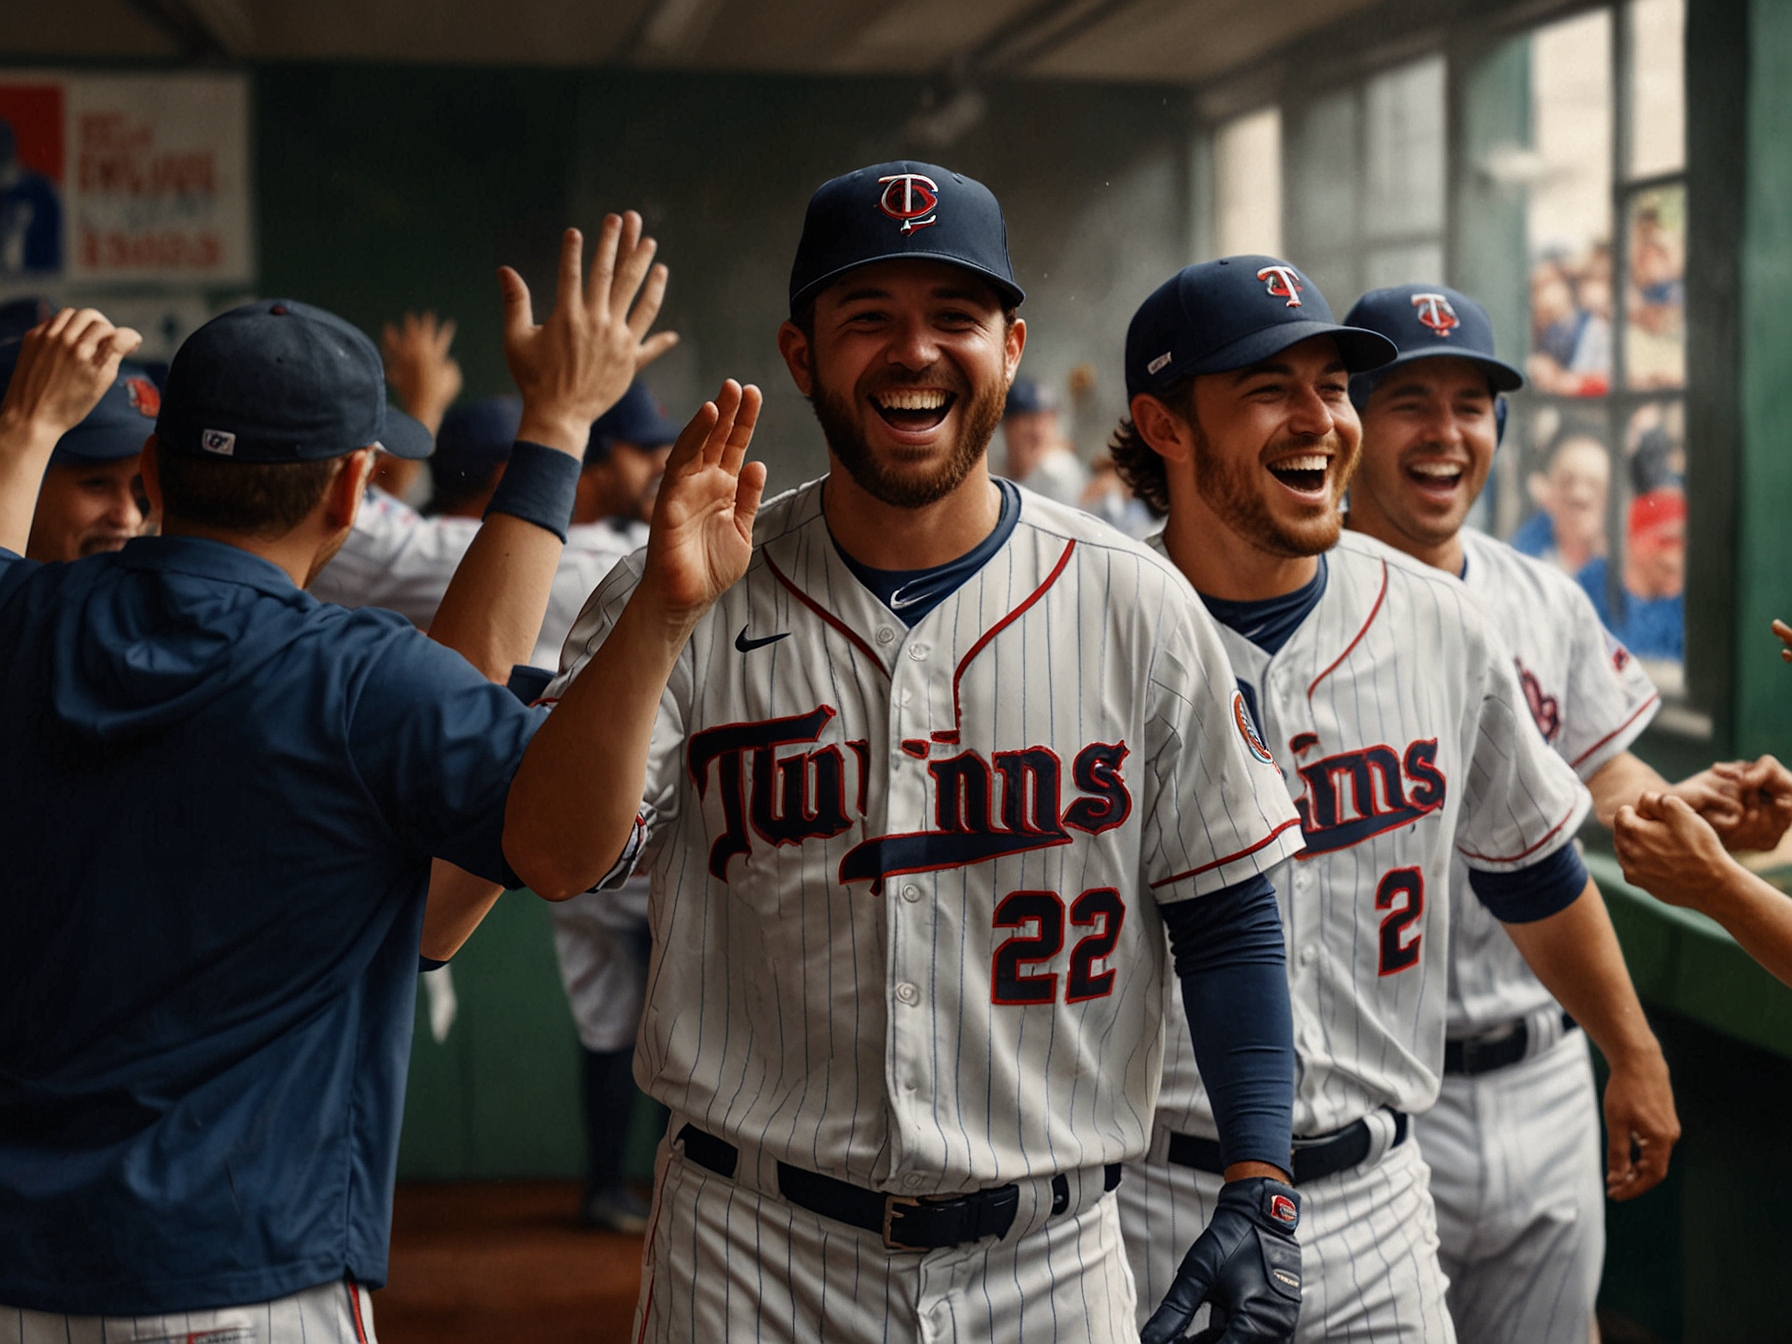 Minnesota Twins players celebrating their victory in the dugout after winning the first game of the doubleheader.